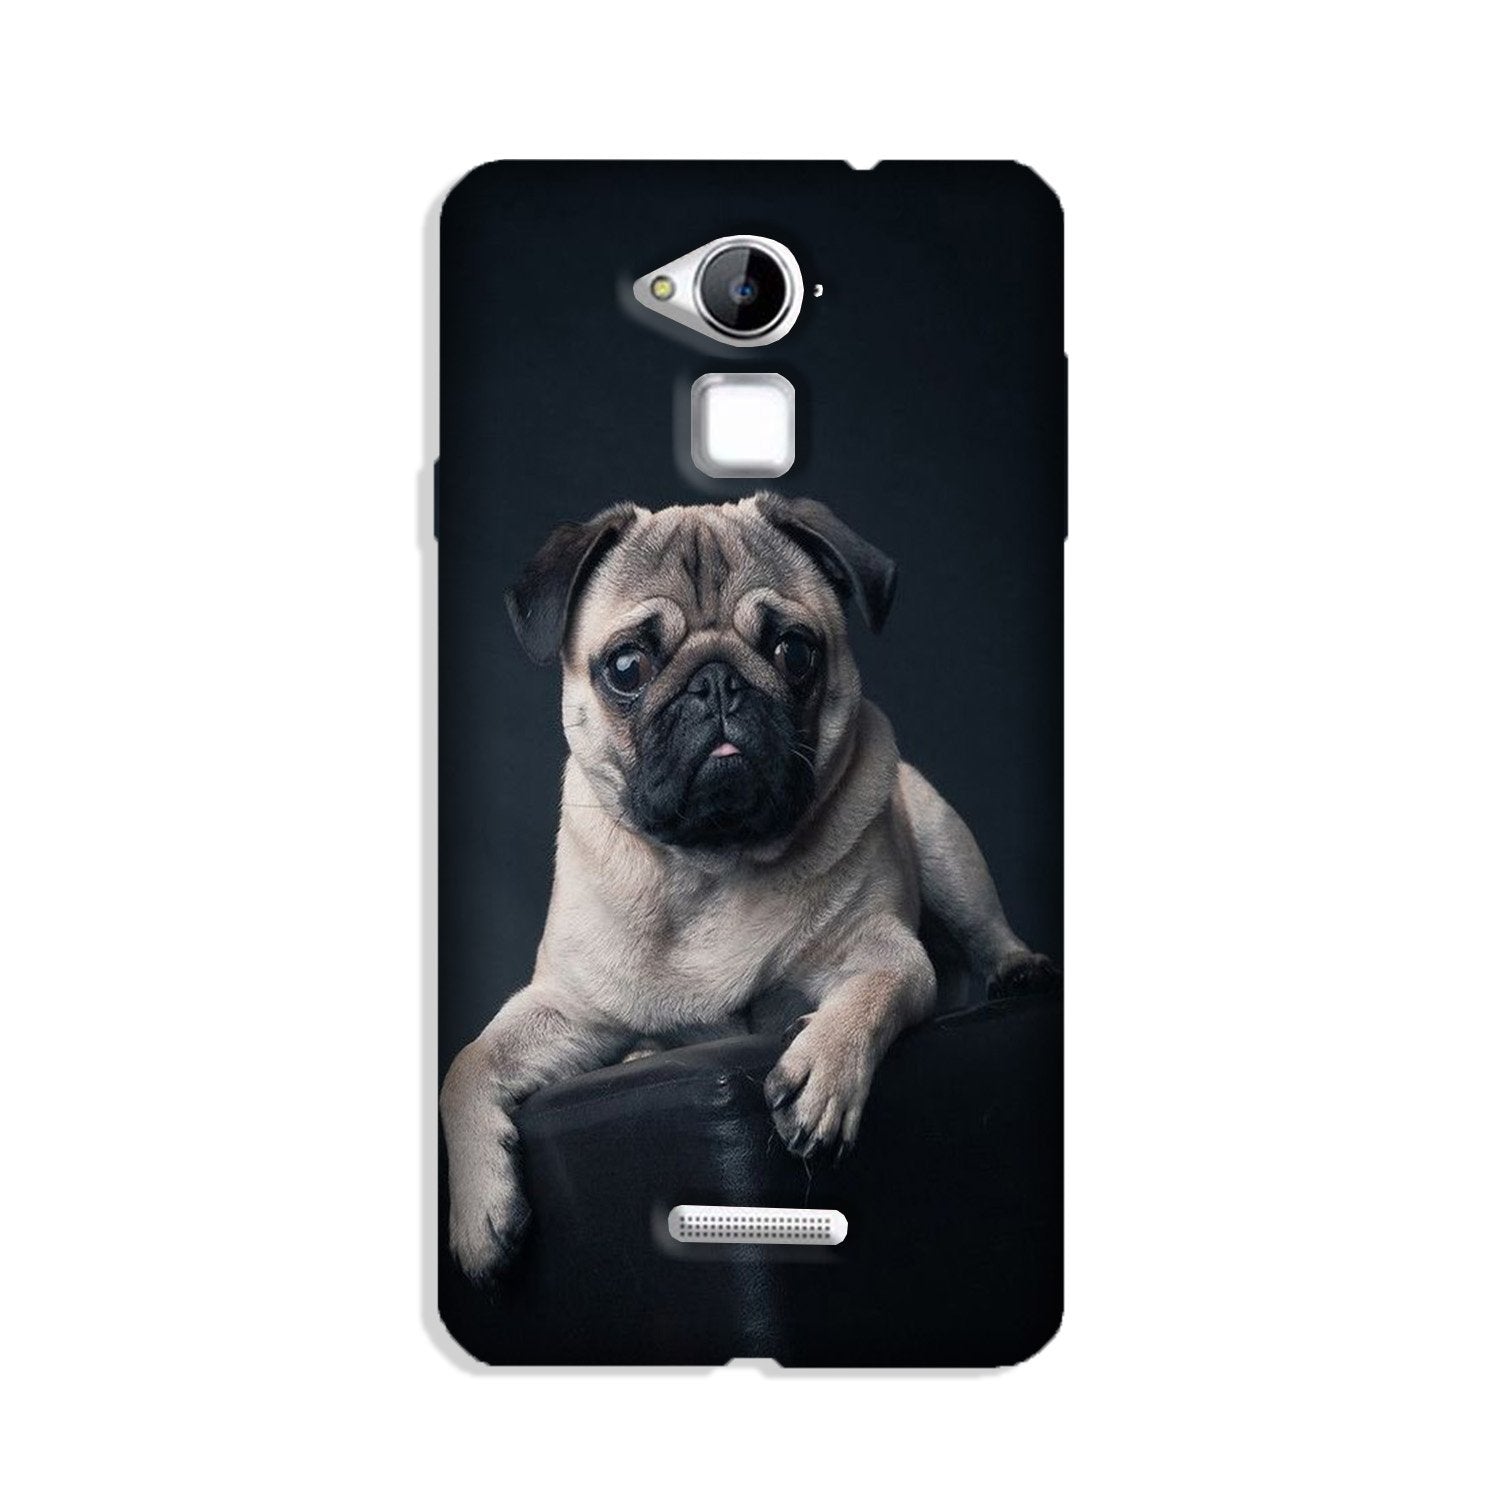 little Puppy Case for Coolpad Note 3